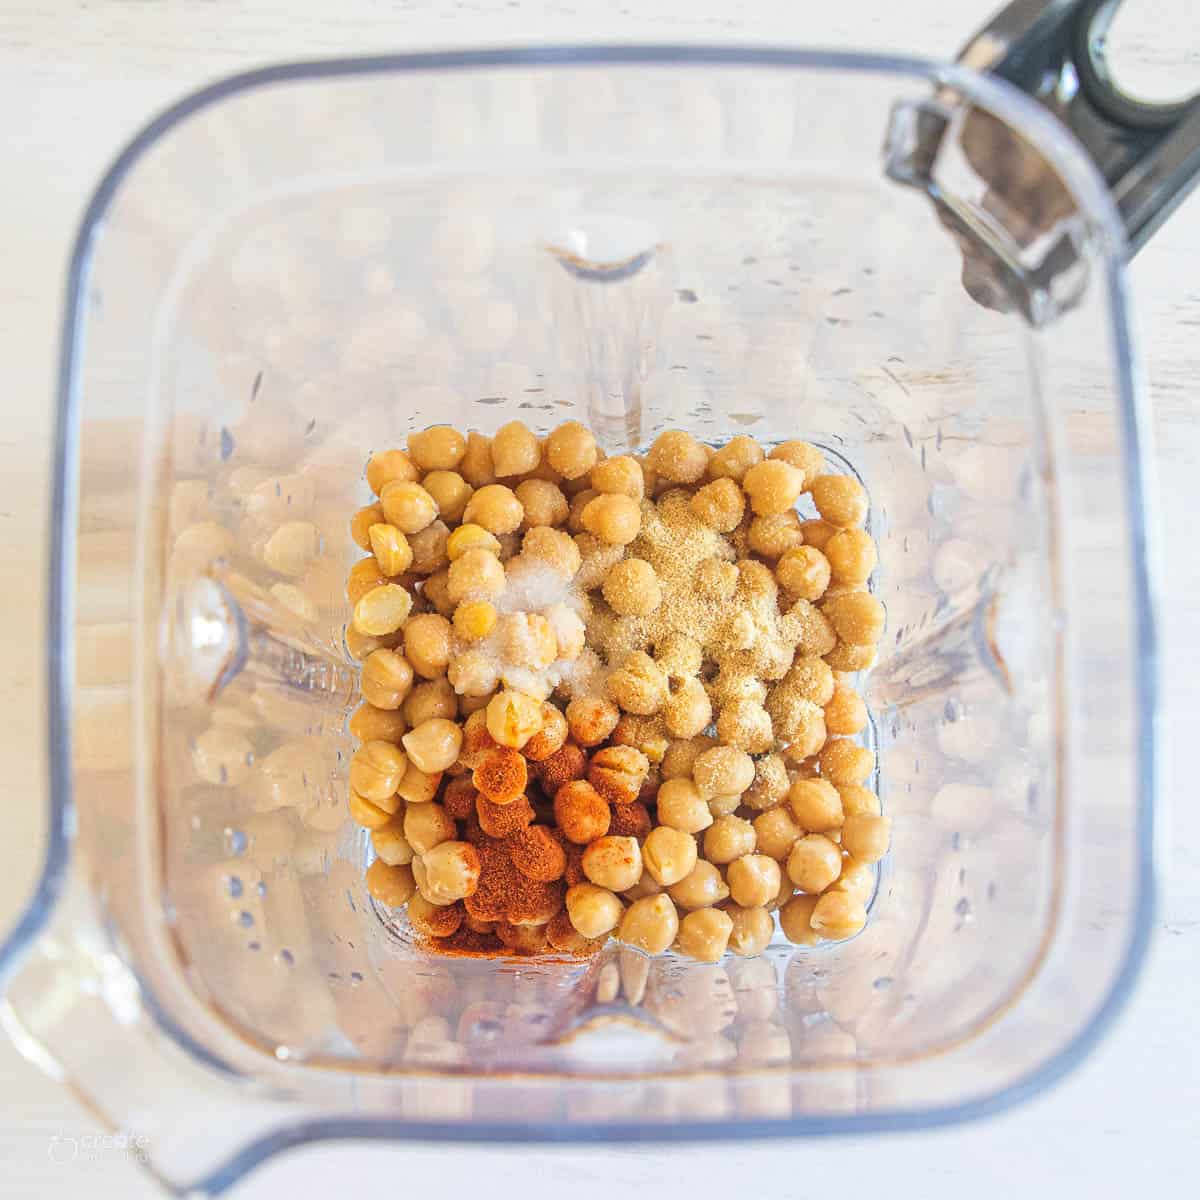 Top down view of chickpeas in a blender.